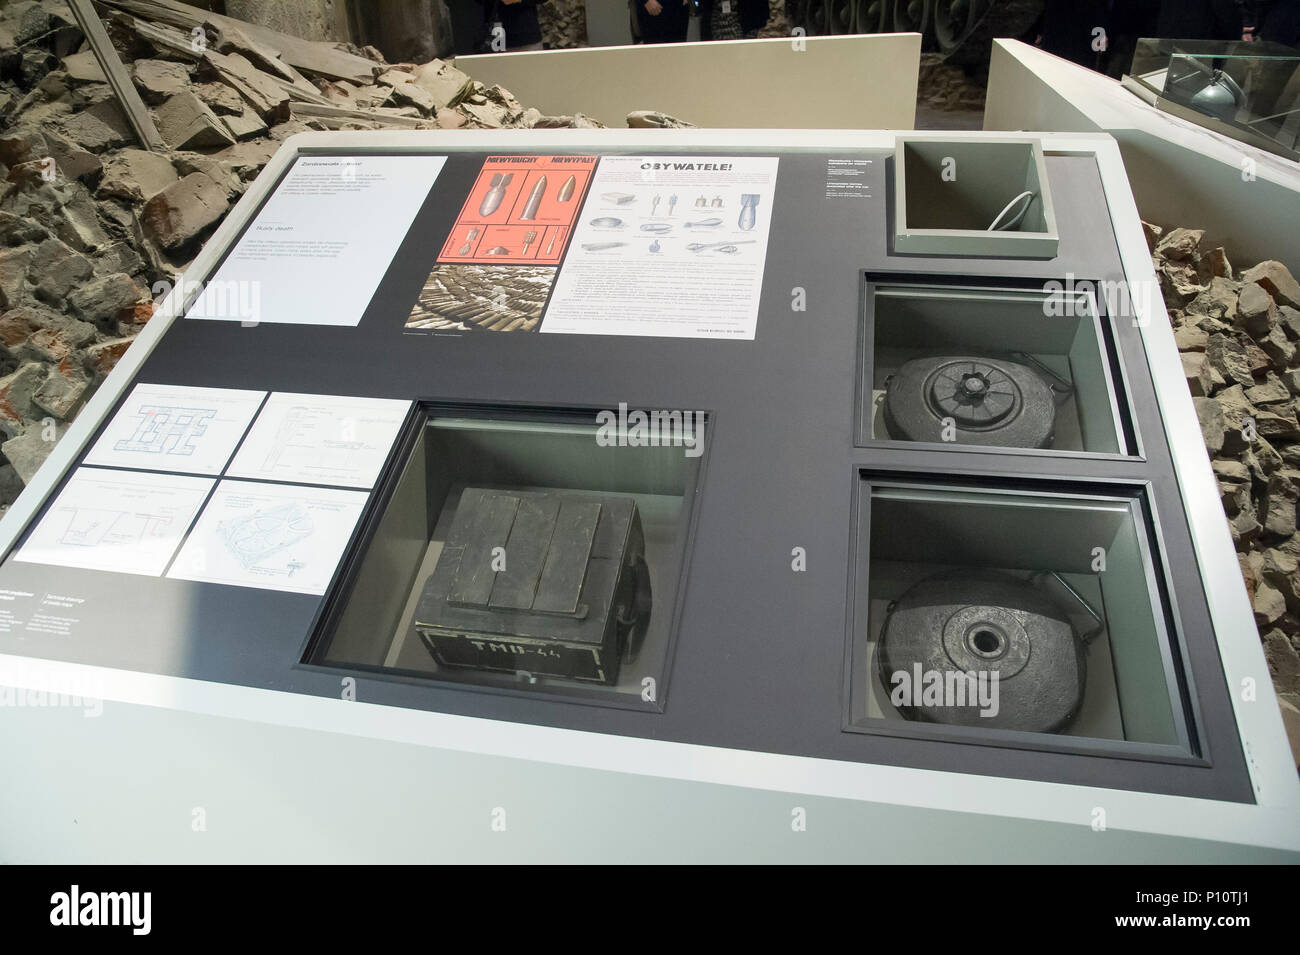 Land mines as a part of exhibion in Museum of the Second World War in Gdansk, Poland. January 23rd 2017 © Wojciech Strozyk / Alamy Stock Photo Stock Photo